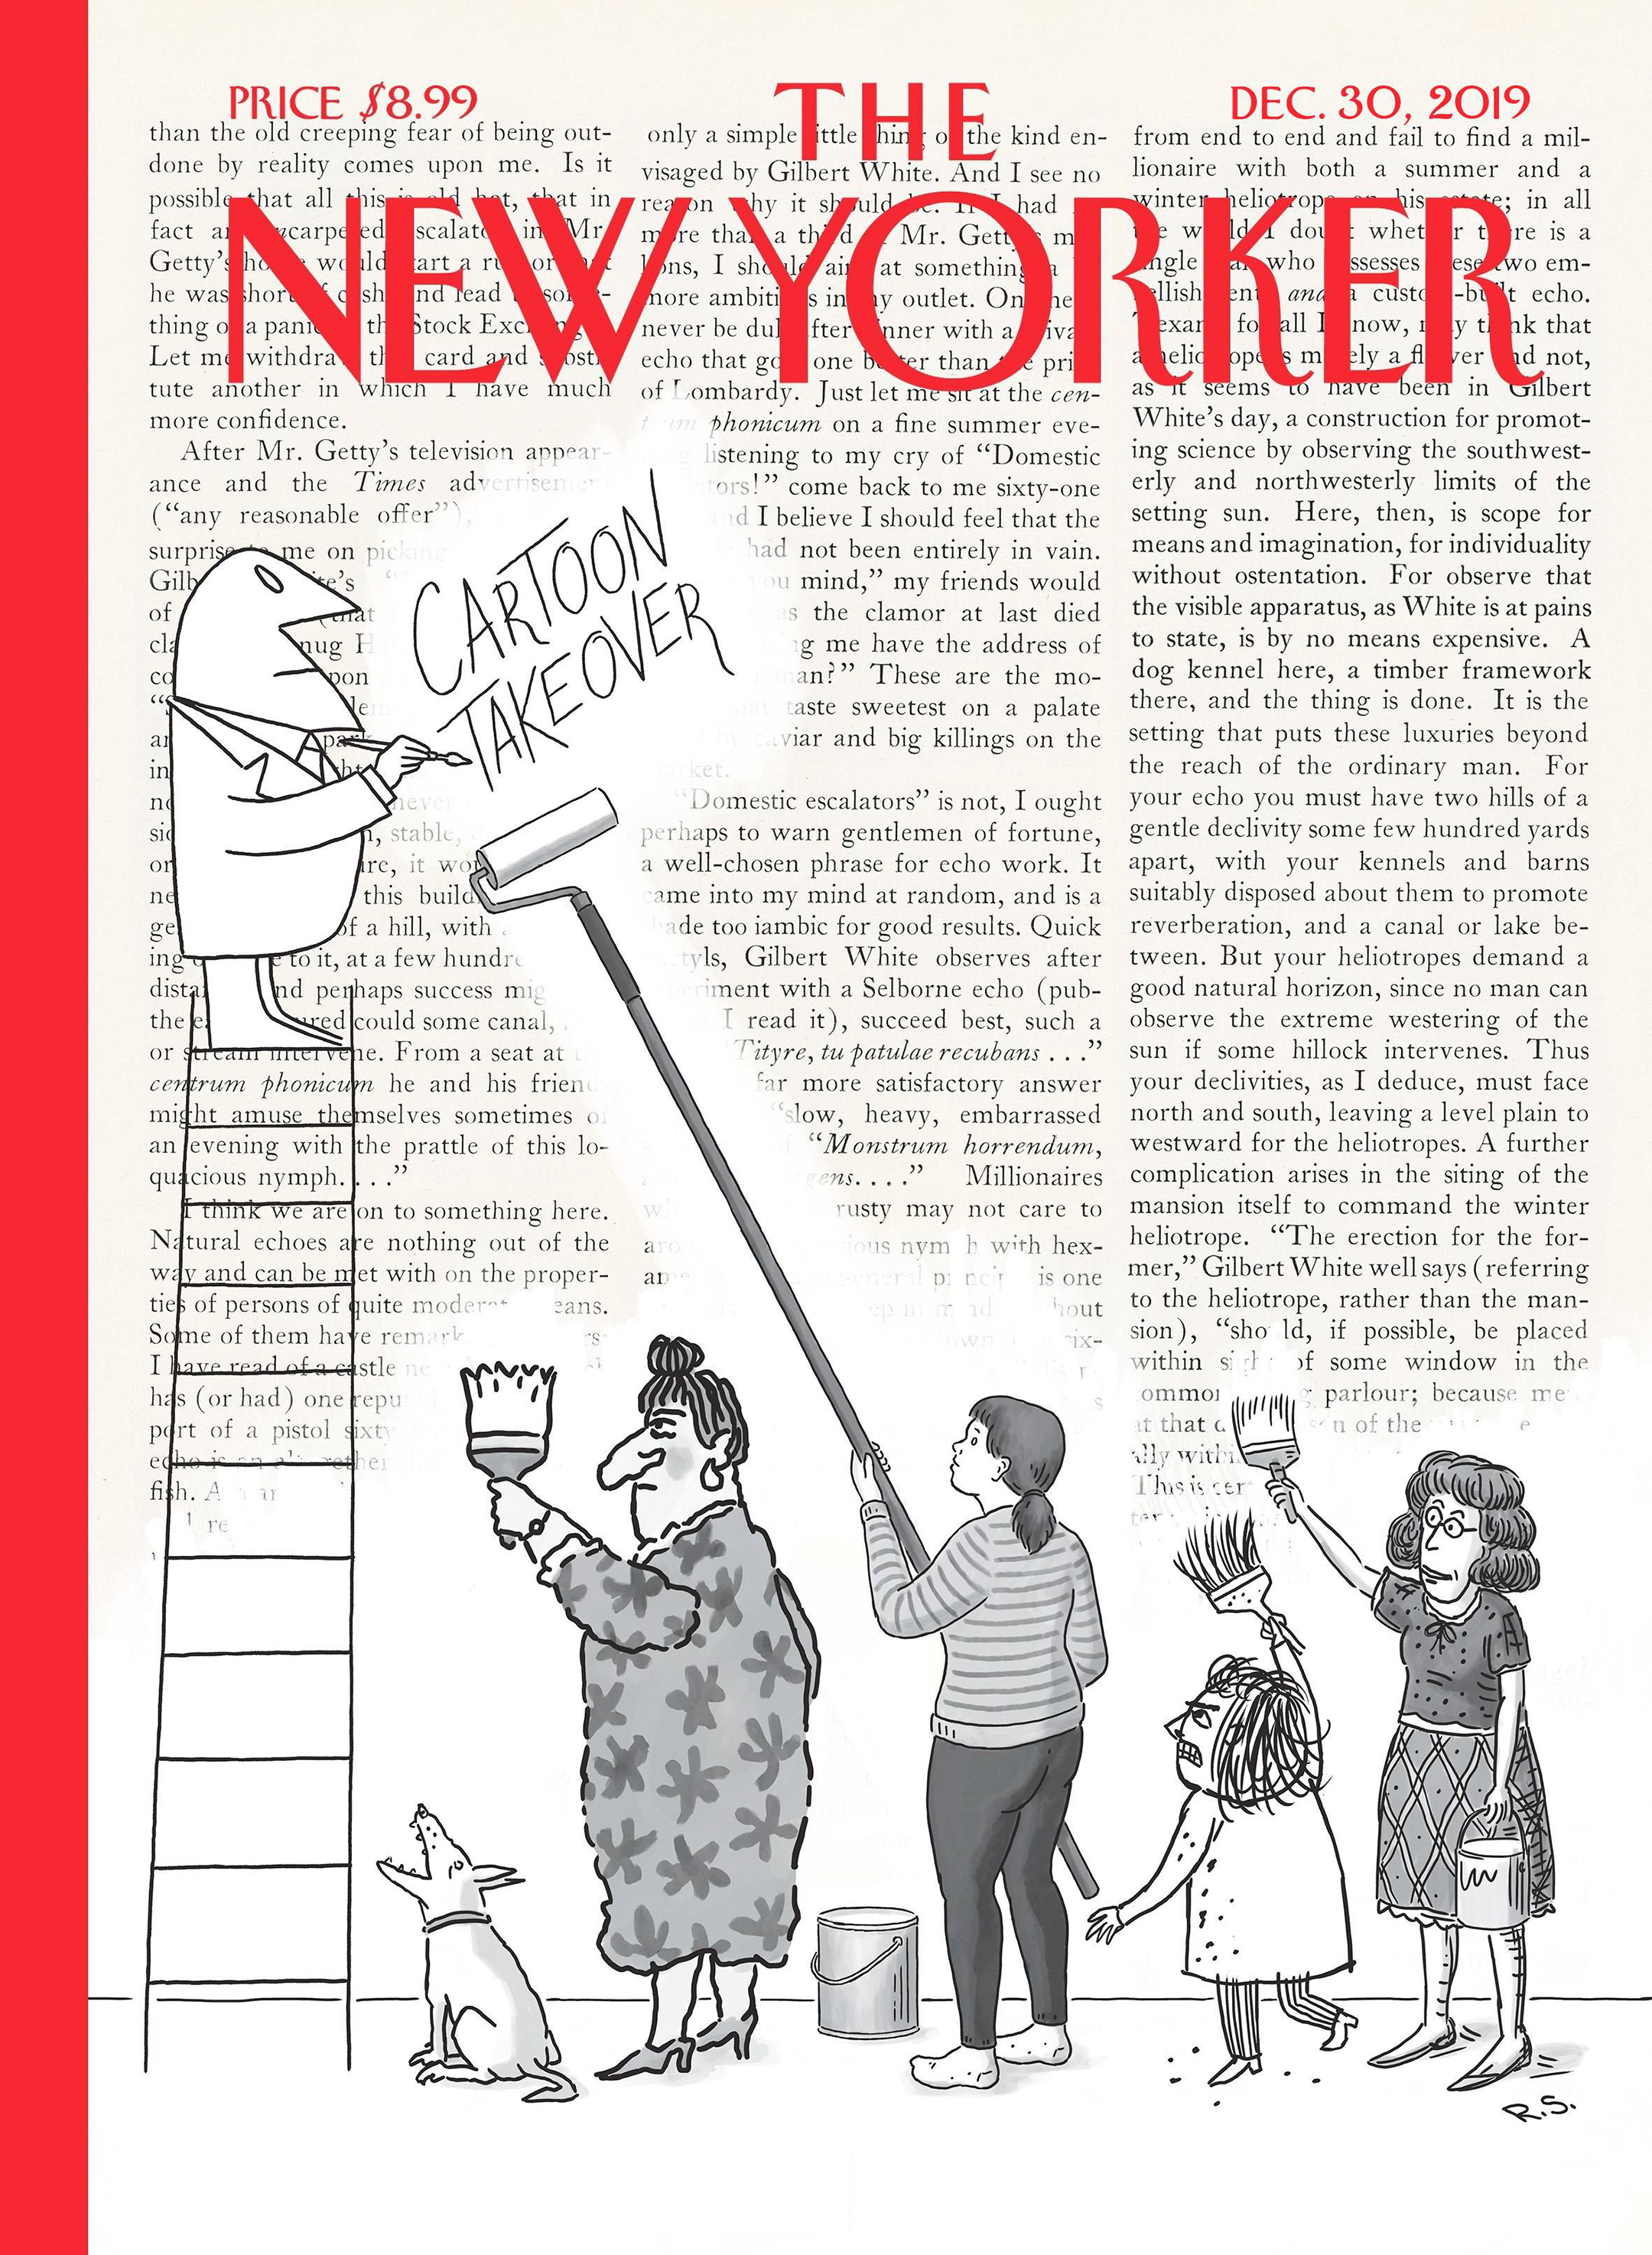 the cover of the december 30, 2019, issue of the new yorker, which was a special cartoon takeover issue of the magazine